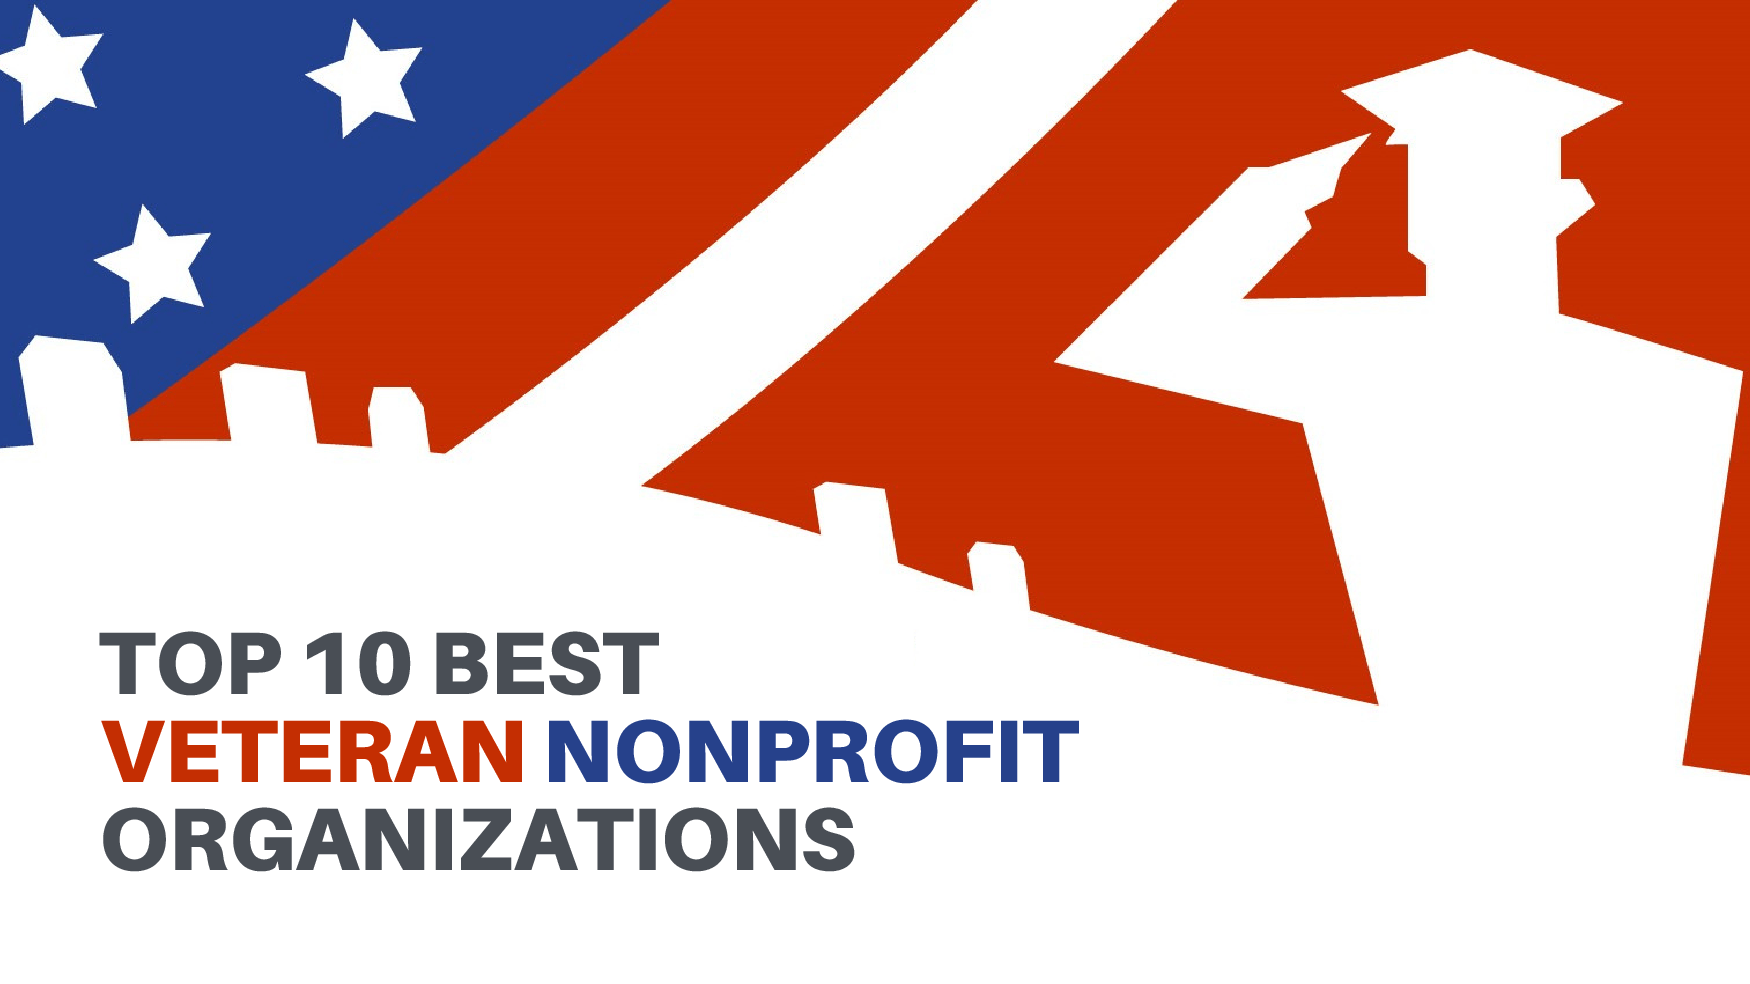 Top 10 Best Veteran Nonprofit Organizations That Making A Difference